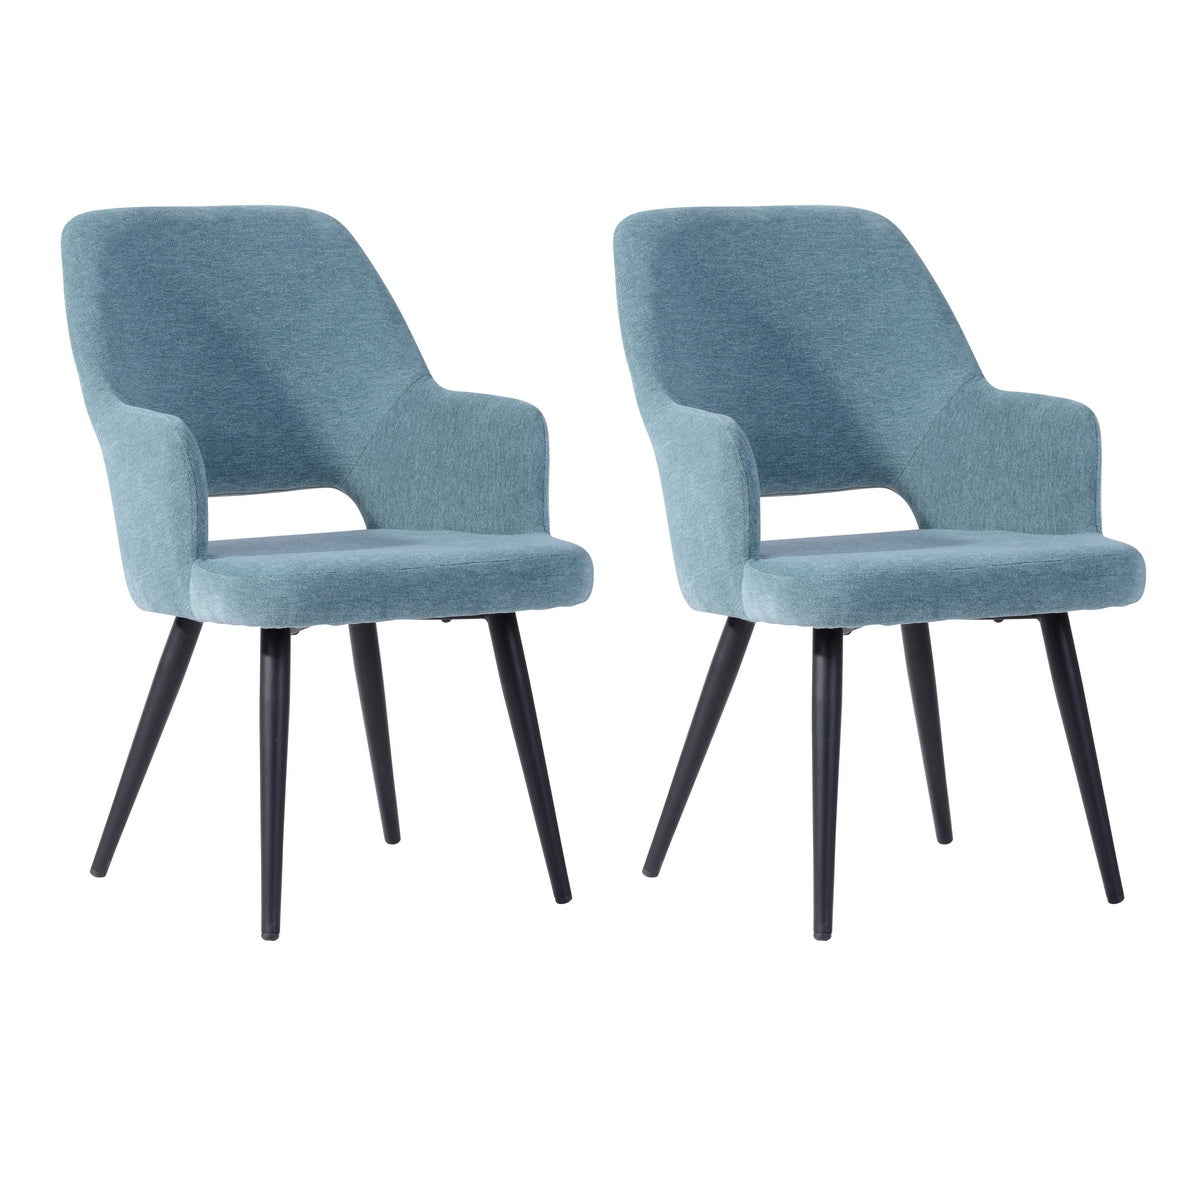 Set of 2 Fabric  Metal Frame Dining Chairs (Teal)